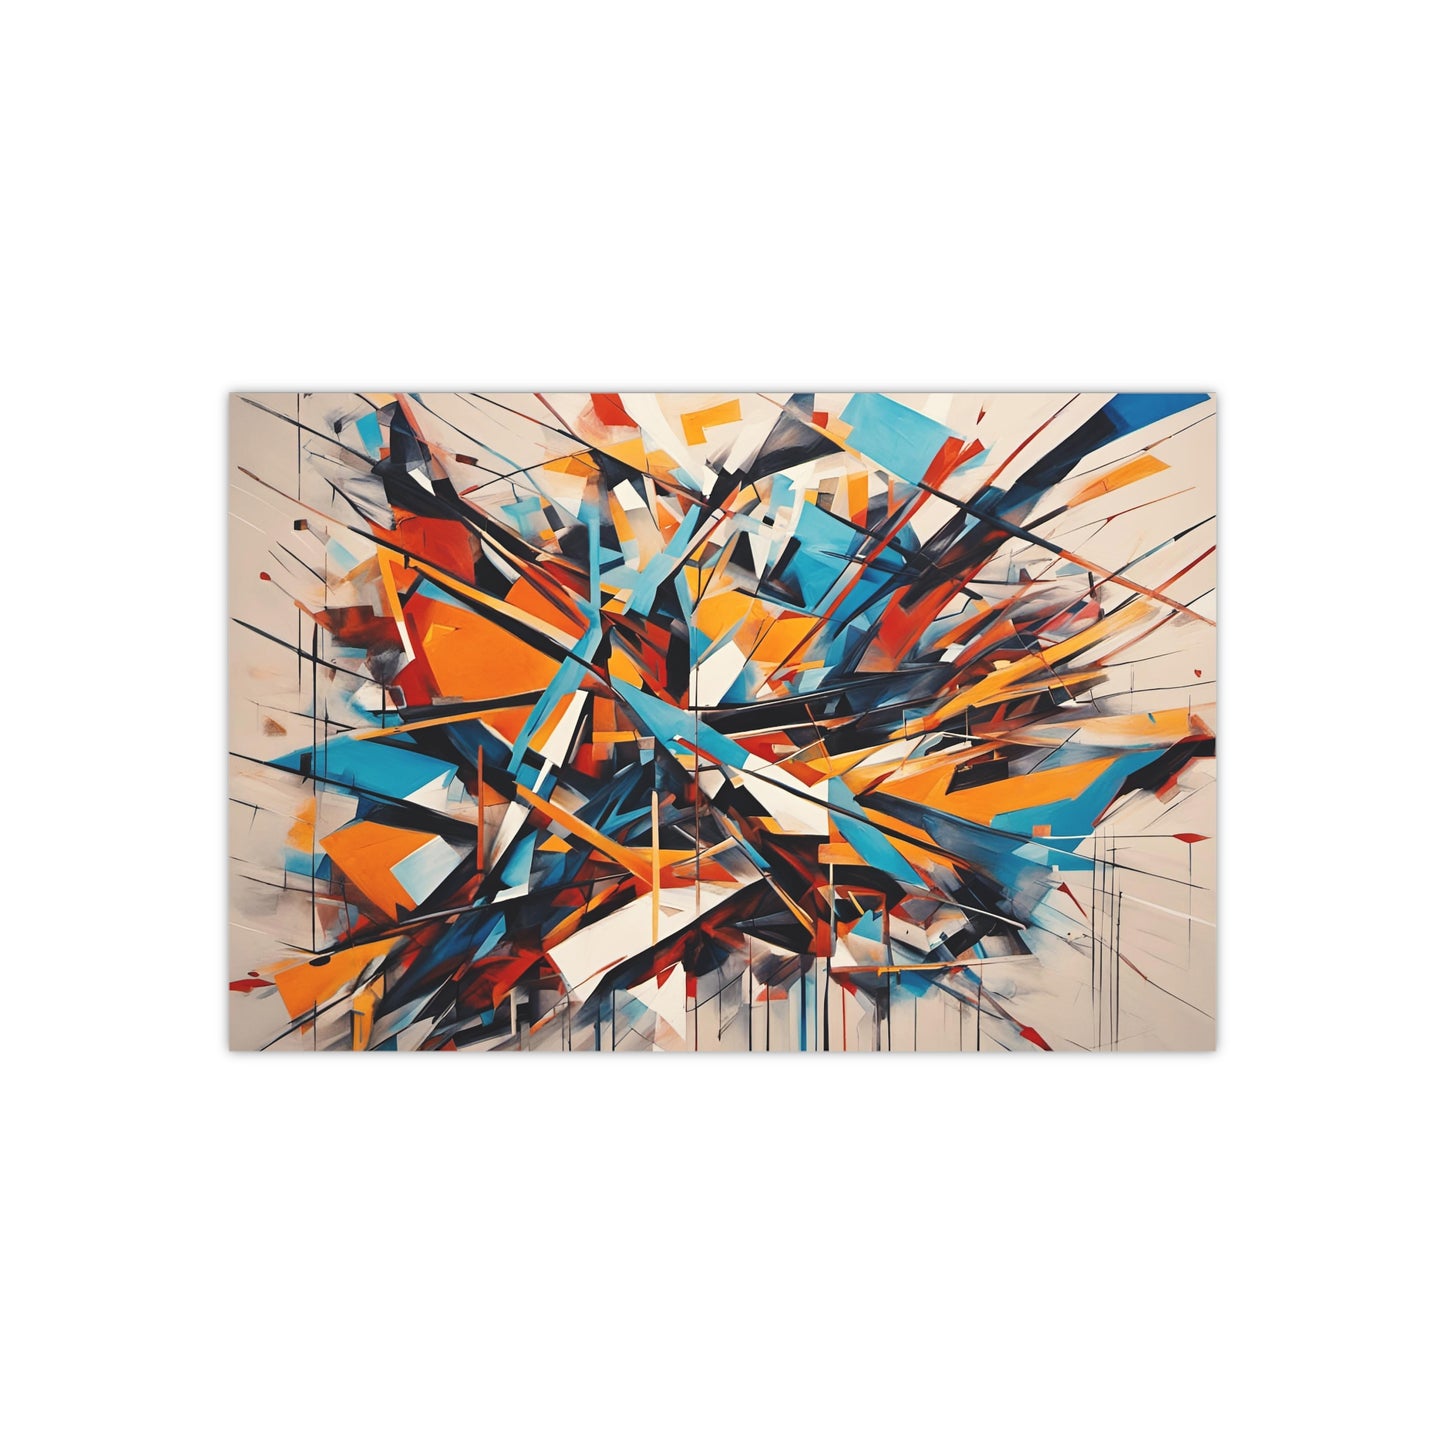 Abstract Art Wall Print - Multicolor Explosion Print on Museum-Quality Archival Paper